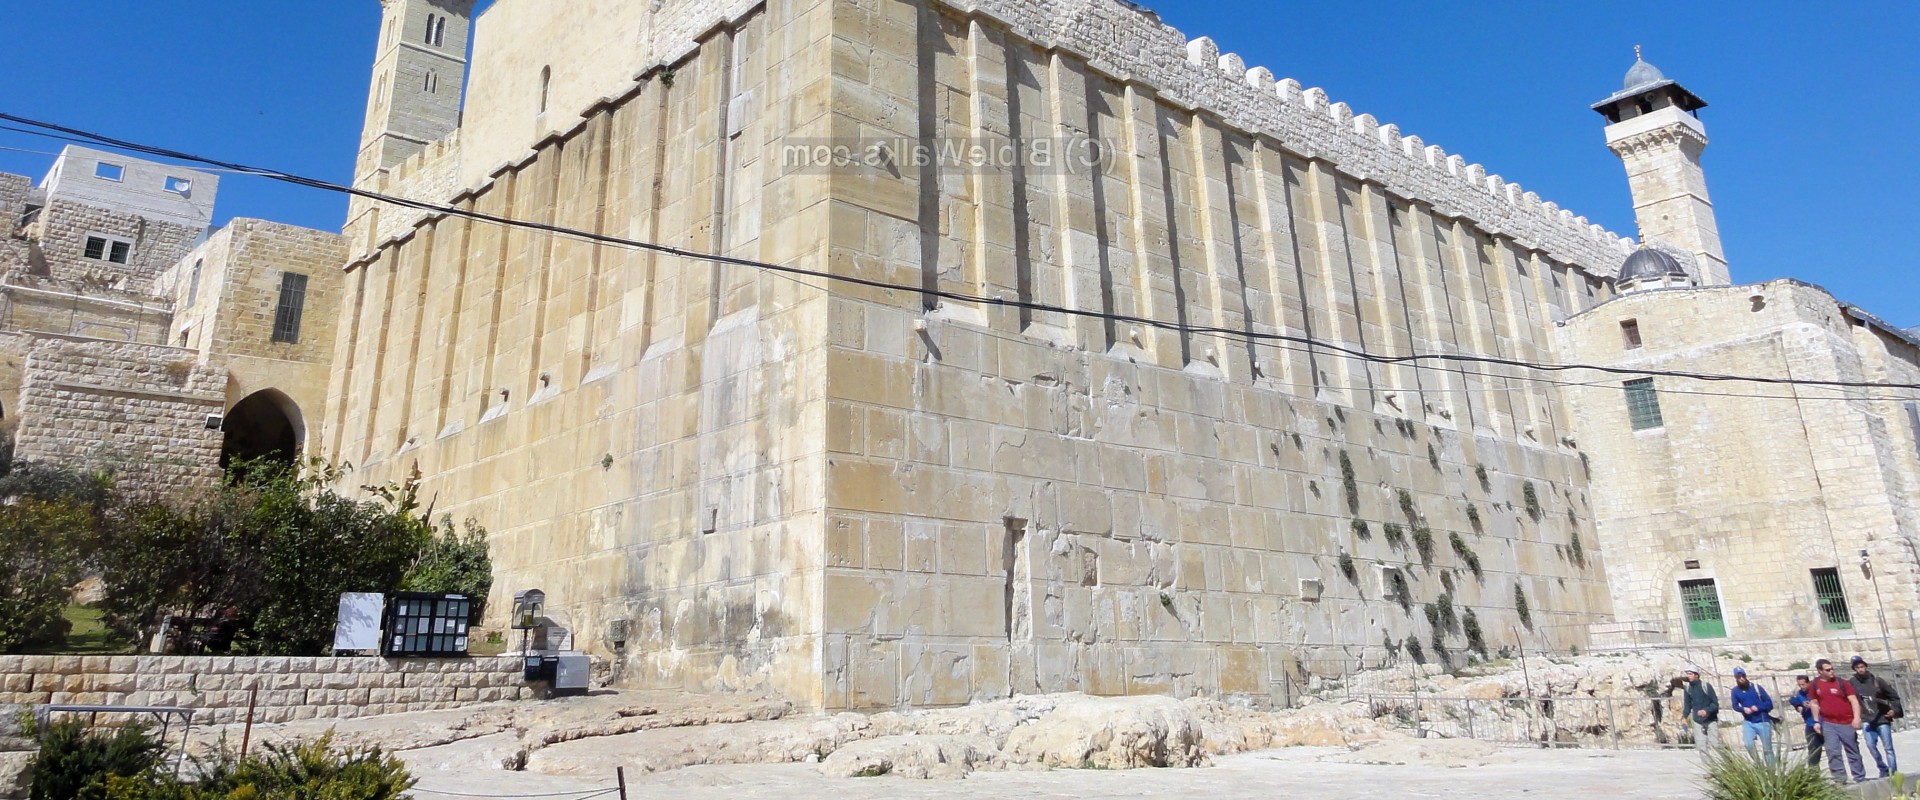 The Ancient City of Hebron: A Historical Overview